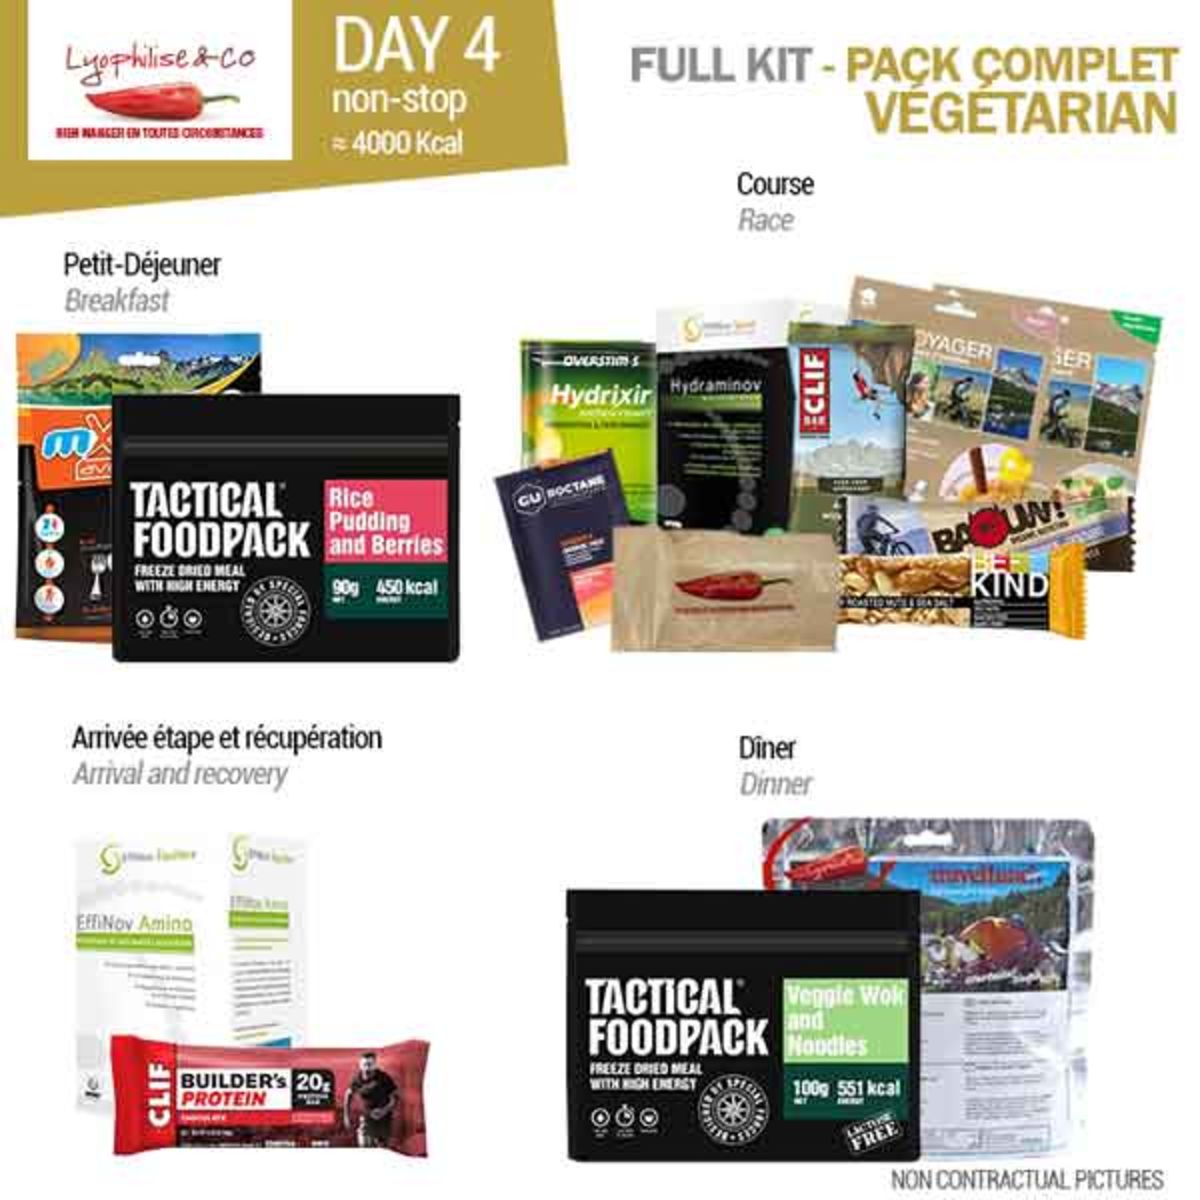 Vegetarian 7-day pack - Ultra-trail - 2700 kcal/day